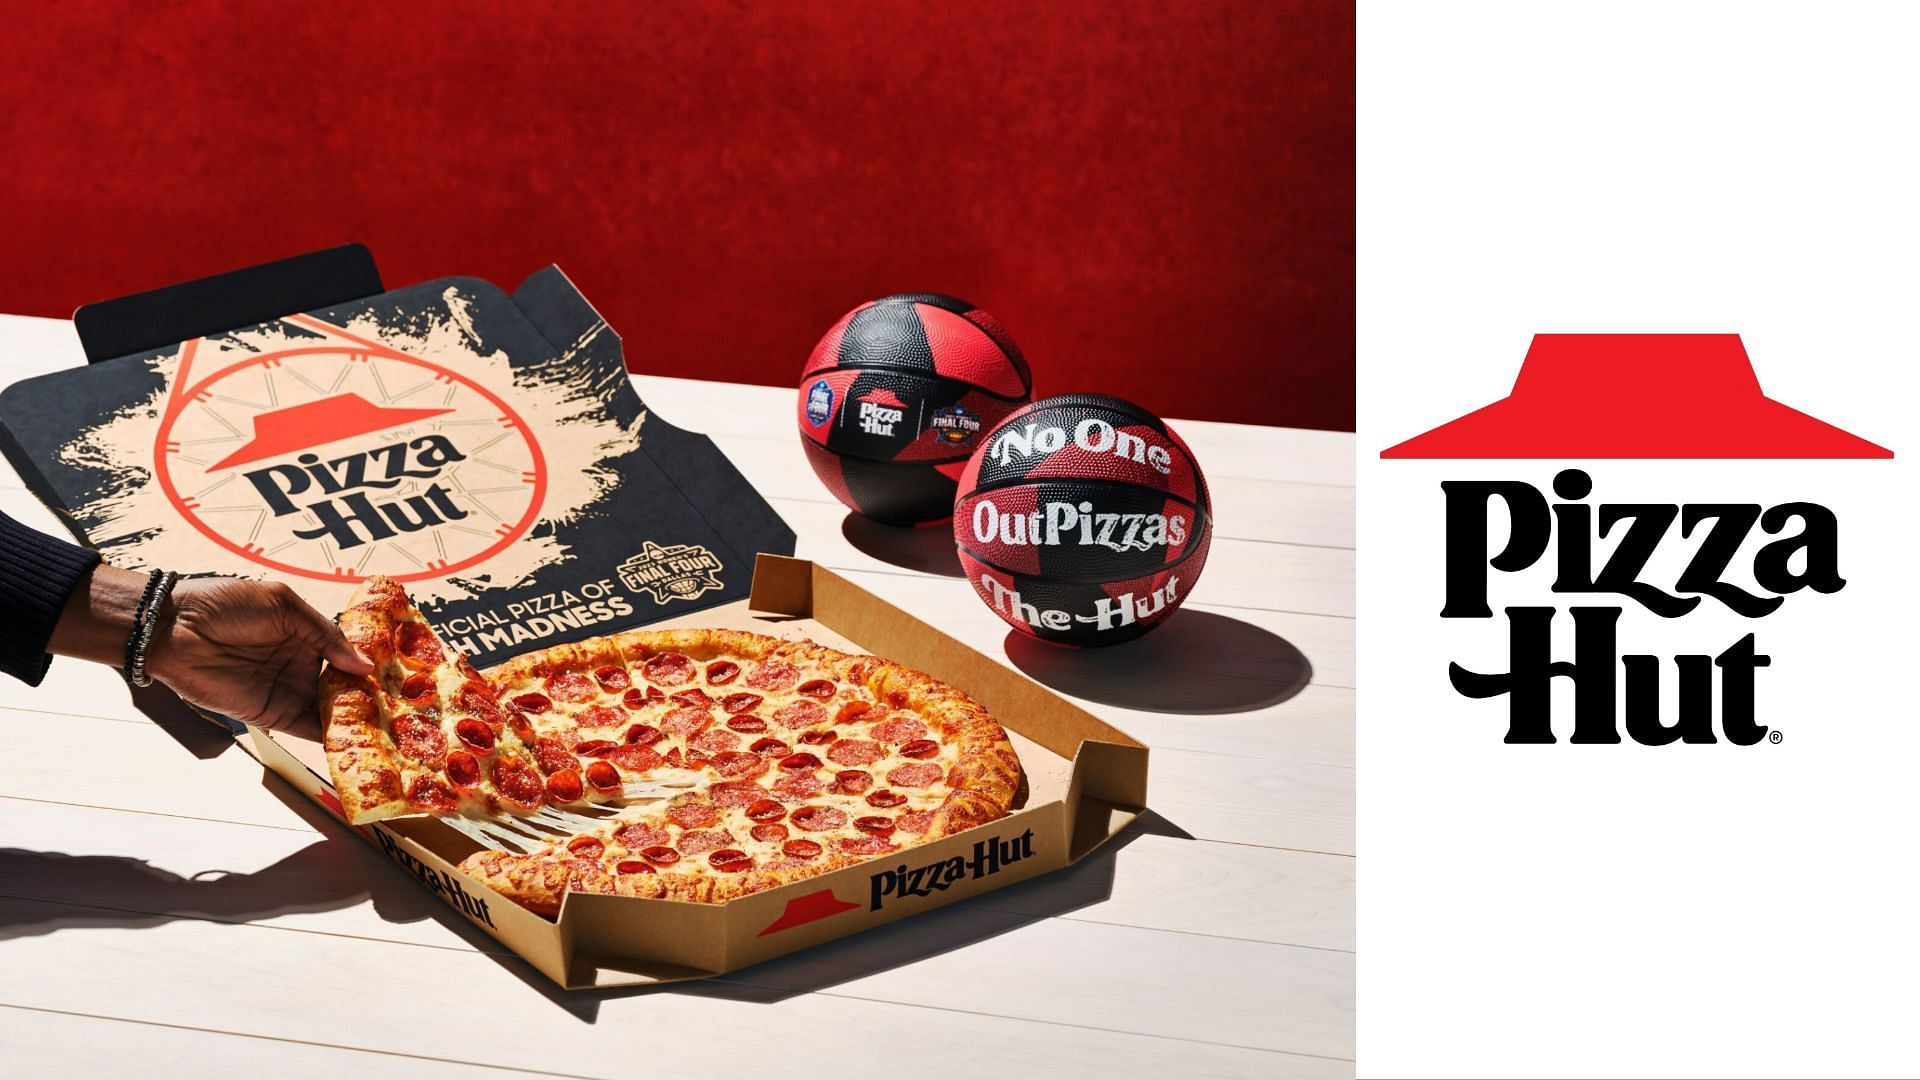 the Match Madness Mini Basketballs return to stores after 33 years (Image via Pizza Hut)